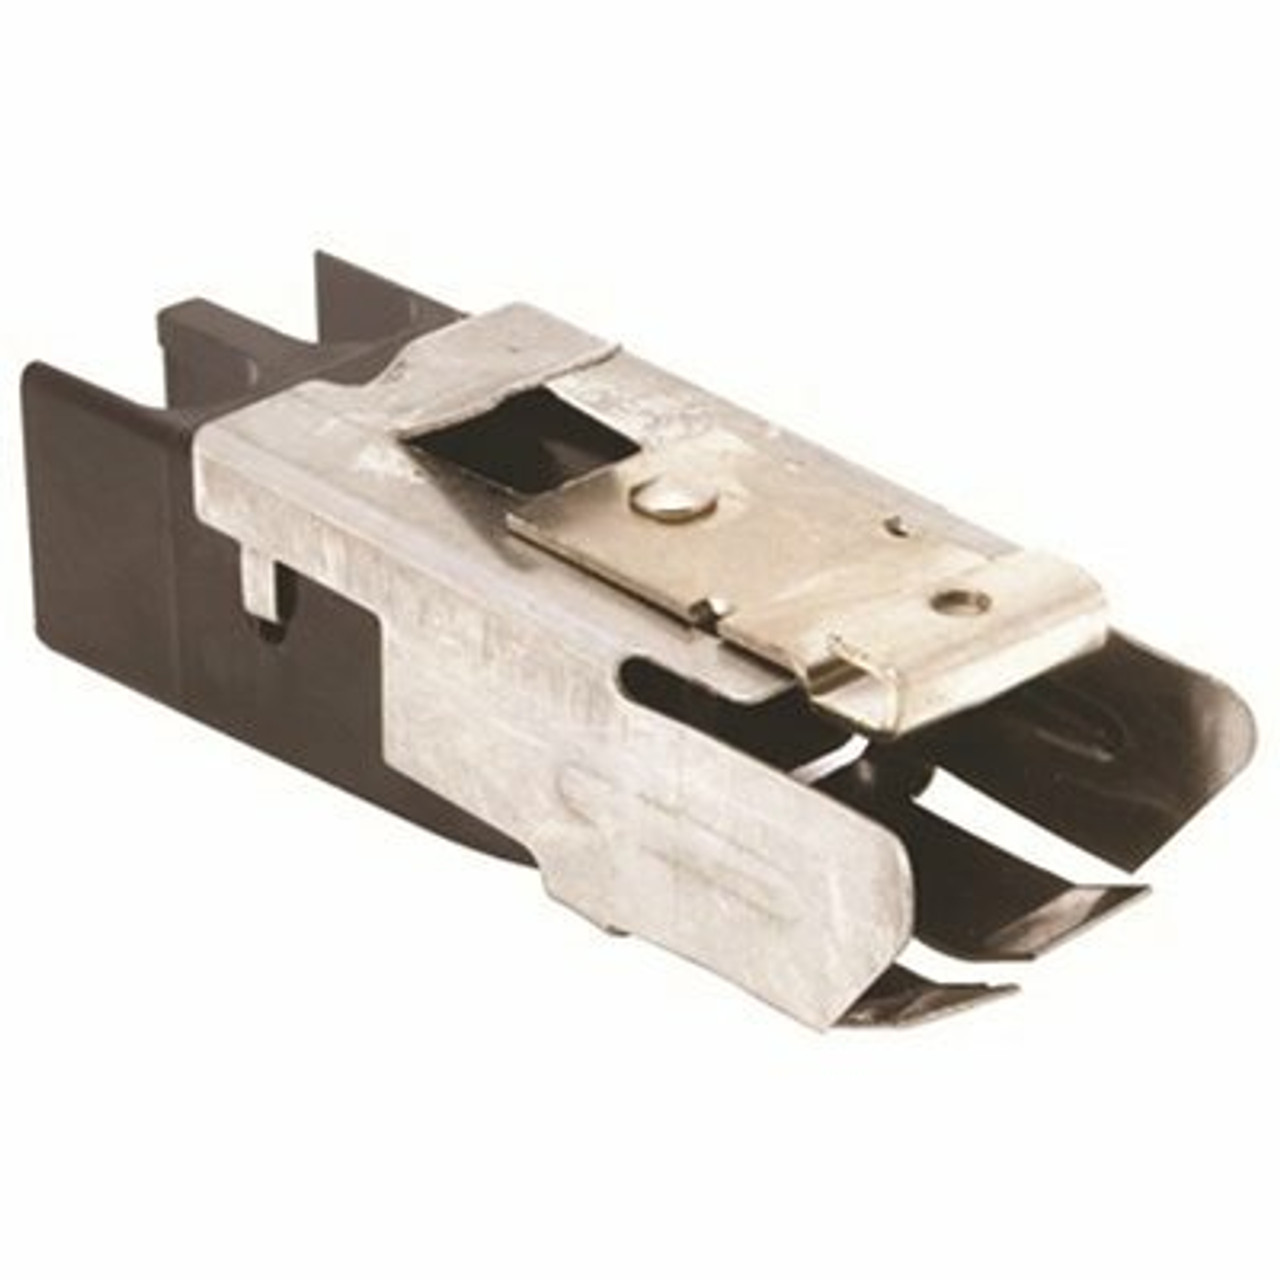 Supco Universal Plug-In Range Surface Element Receptacle